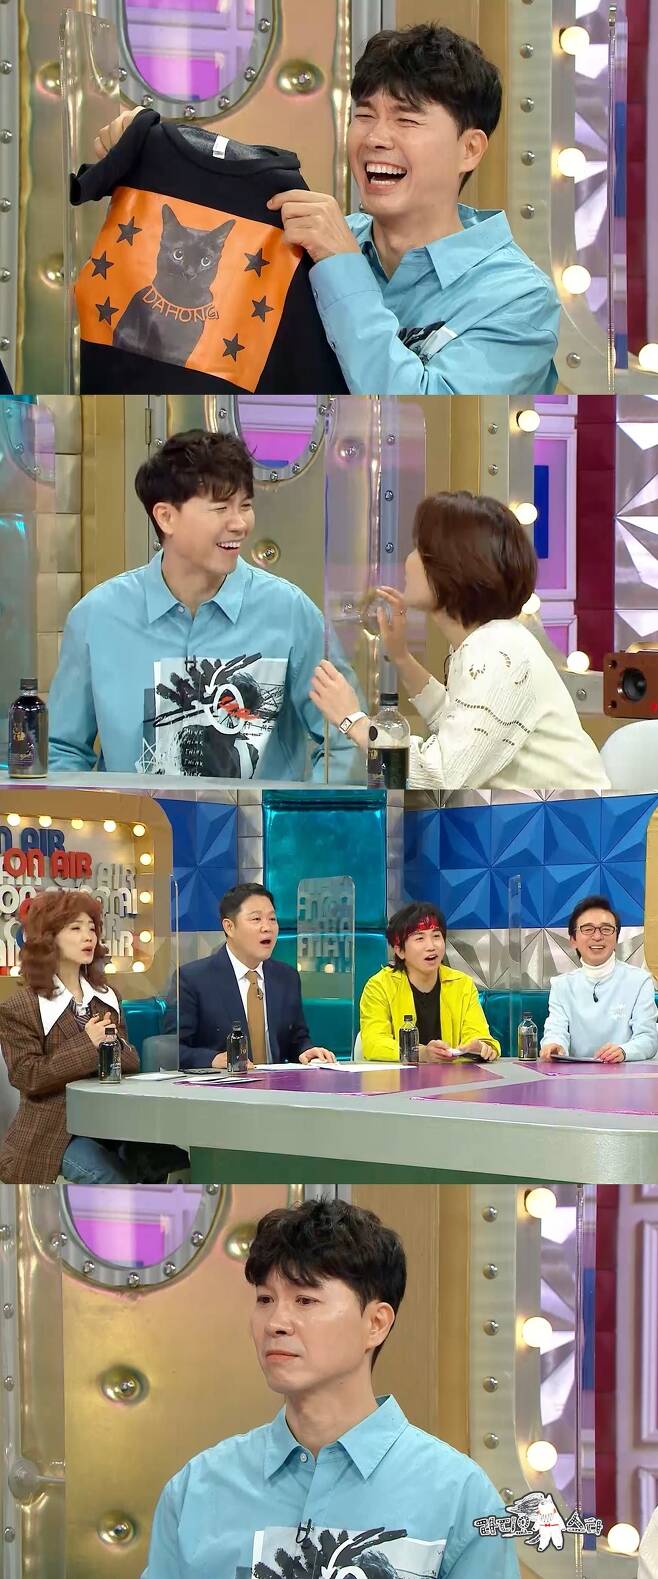 Seoul = = Comedian Park Soo-hong appears on Radio Star to reveal full Kahaani from his first meeting with Dahongi, the Soul Circle of Friends companion, to becoming a family.Park Soo-hong, who has been proud of Dahong throughout the filming, is going to take out his heart, saying that he received a big Taiwan Taiyuan International Airport from Dahong who came like fate.MBC Radio Star, which is broadcasted on the afternoon of the 7th, is featured in Legendary Combi with Joo Byung-jin - Nosayeon, Park Soo-hong - Park Kyung-rim,Park Soo-hong is called Dahongi Father instead of existing modifiers such as Gag Gentleman and Beautiful Comedian these days.This is because after welcoming Dahongi, a cat who met like fate in 2019, as a family, he has been loved by revealing his daily life with his companion Dahongi through YouTube channel.Park Soo-hong, who expressed his affection for Dahong Lee as My child, reveals the full Kahaani, who was welcomed as a family from his first meeting with Dahong, The Circle of Friends of Soul, saying that his best friend, Son Heon-su,In particular, Park Soo-hong tells us that Dahong enjoys fashion shows and drives unlike ordinary cats, and We Dahong is really special.Dahong is proud of his T-shirt and cell phone accessories with his face on his face, and he will smile with his love for his child.Park Soo-hong, who continued to talk about Ki Seung-jeon Dahongi with a happy face throughout the recording, says that he had a special feeling for his companion, Daehong.I received a Taiwan Taoyuan International Airport that I have not received from Dahong, Park Soo-hong said, telling an anecdote that I was impressed by Dahong, who was not able to eat properly and kept my side when I suffered from sleep disorders.He will also announce a future plan with Dahong, who is a child who has become part of his life.Park Soo-hong and his soul circle of Friends Dahongis Kahaani can be seen on Radio Star, which is broadcasted at 10:20 pm on July 7.